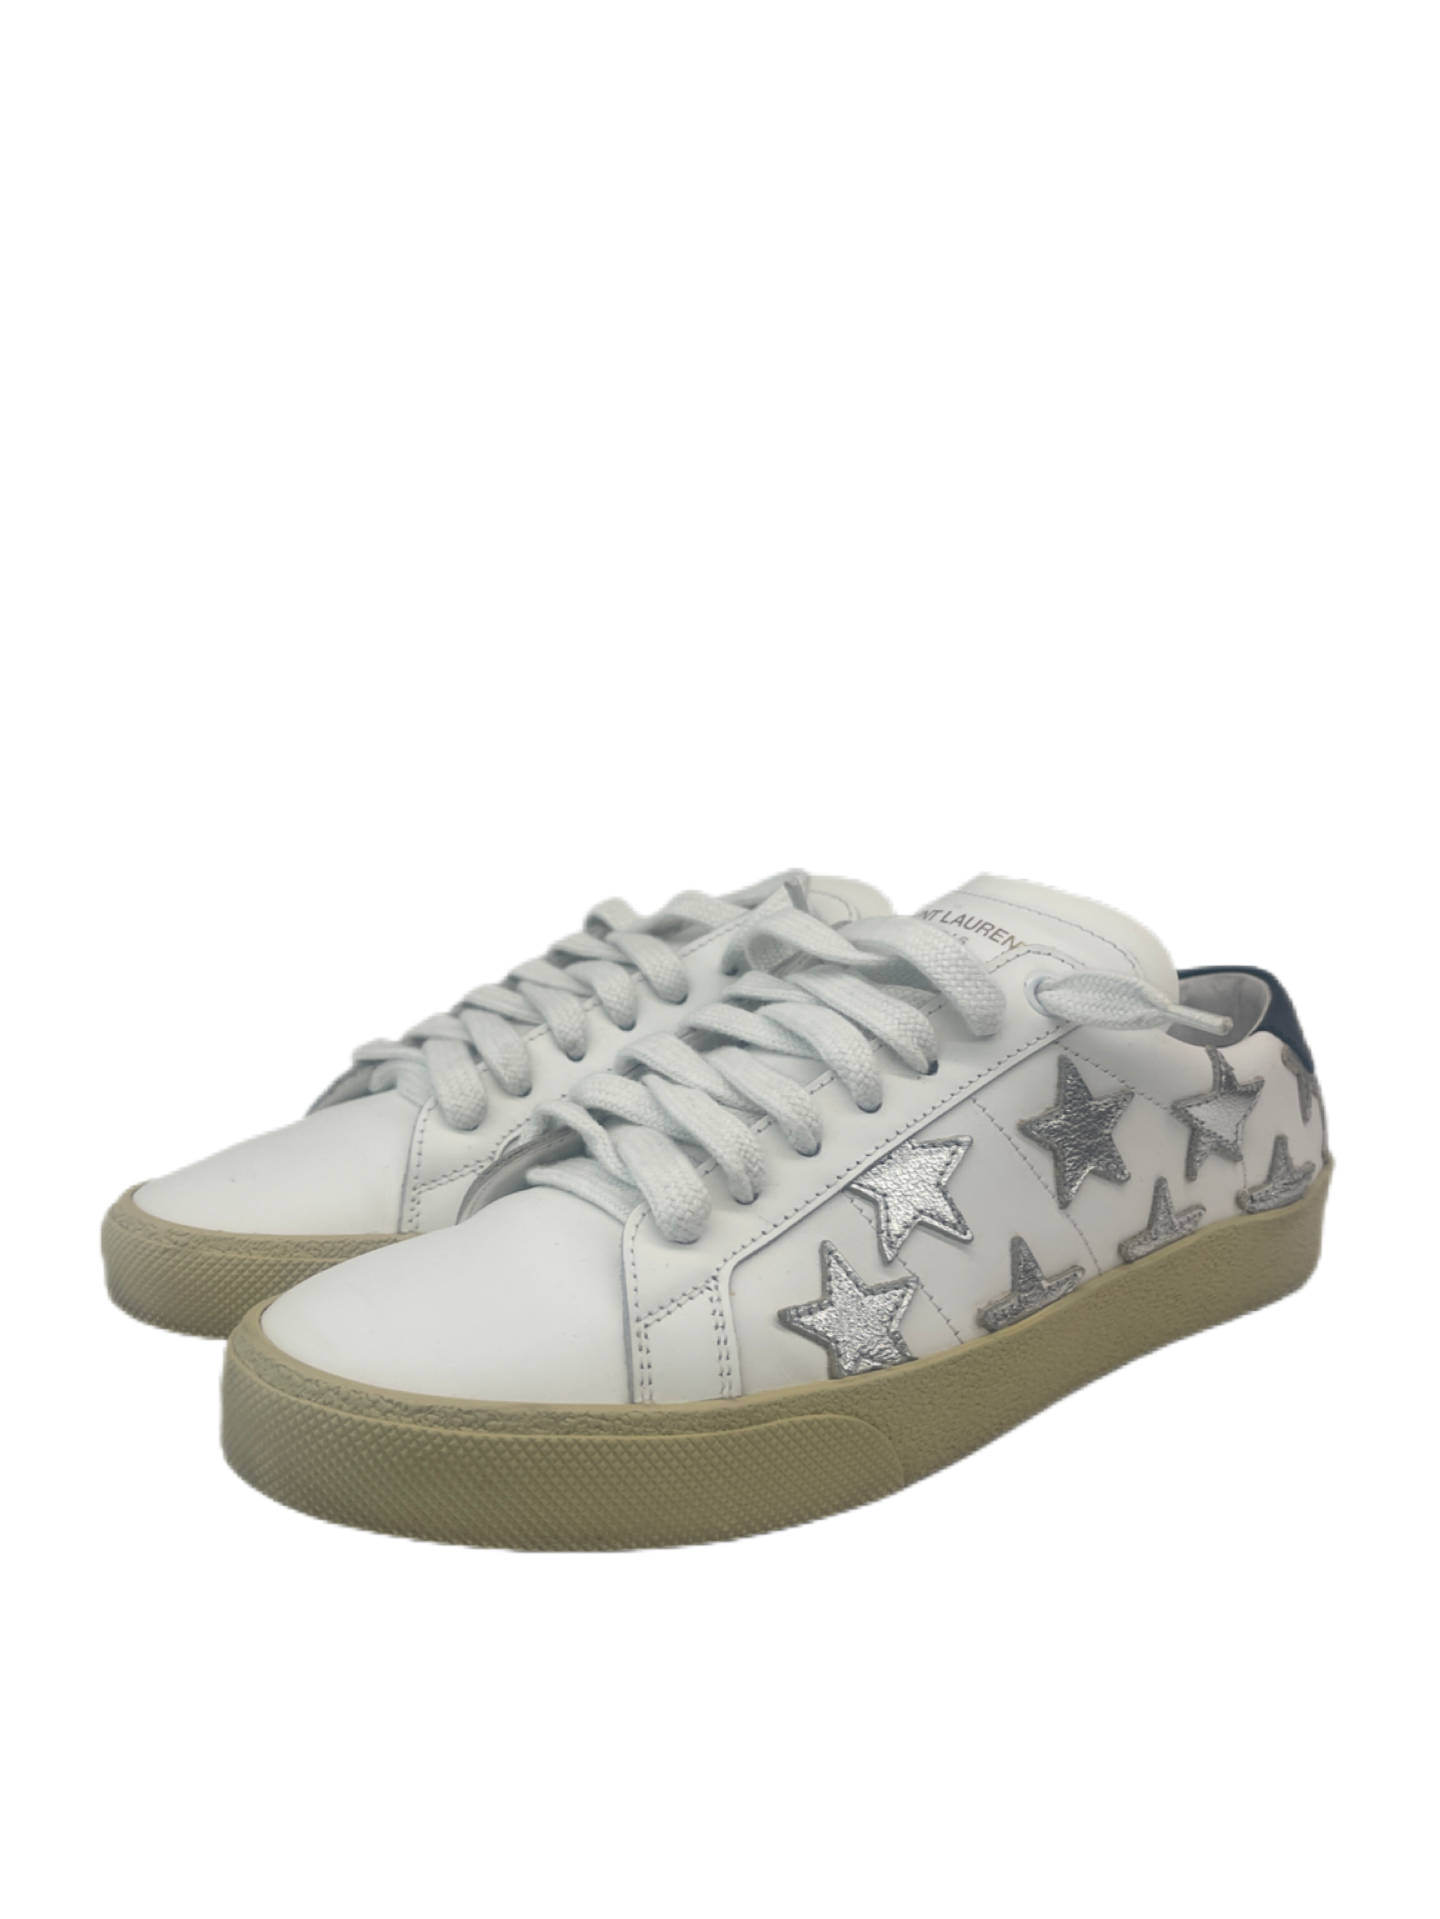 Saint Laurent White & Silver Lace Up Sneakers with Star Leather Applique. Size: 39